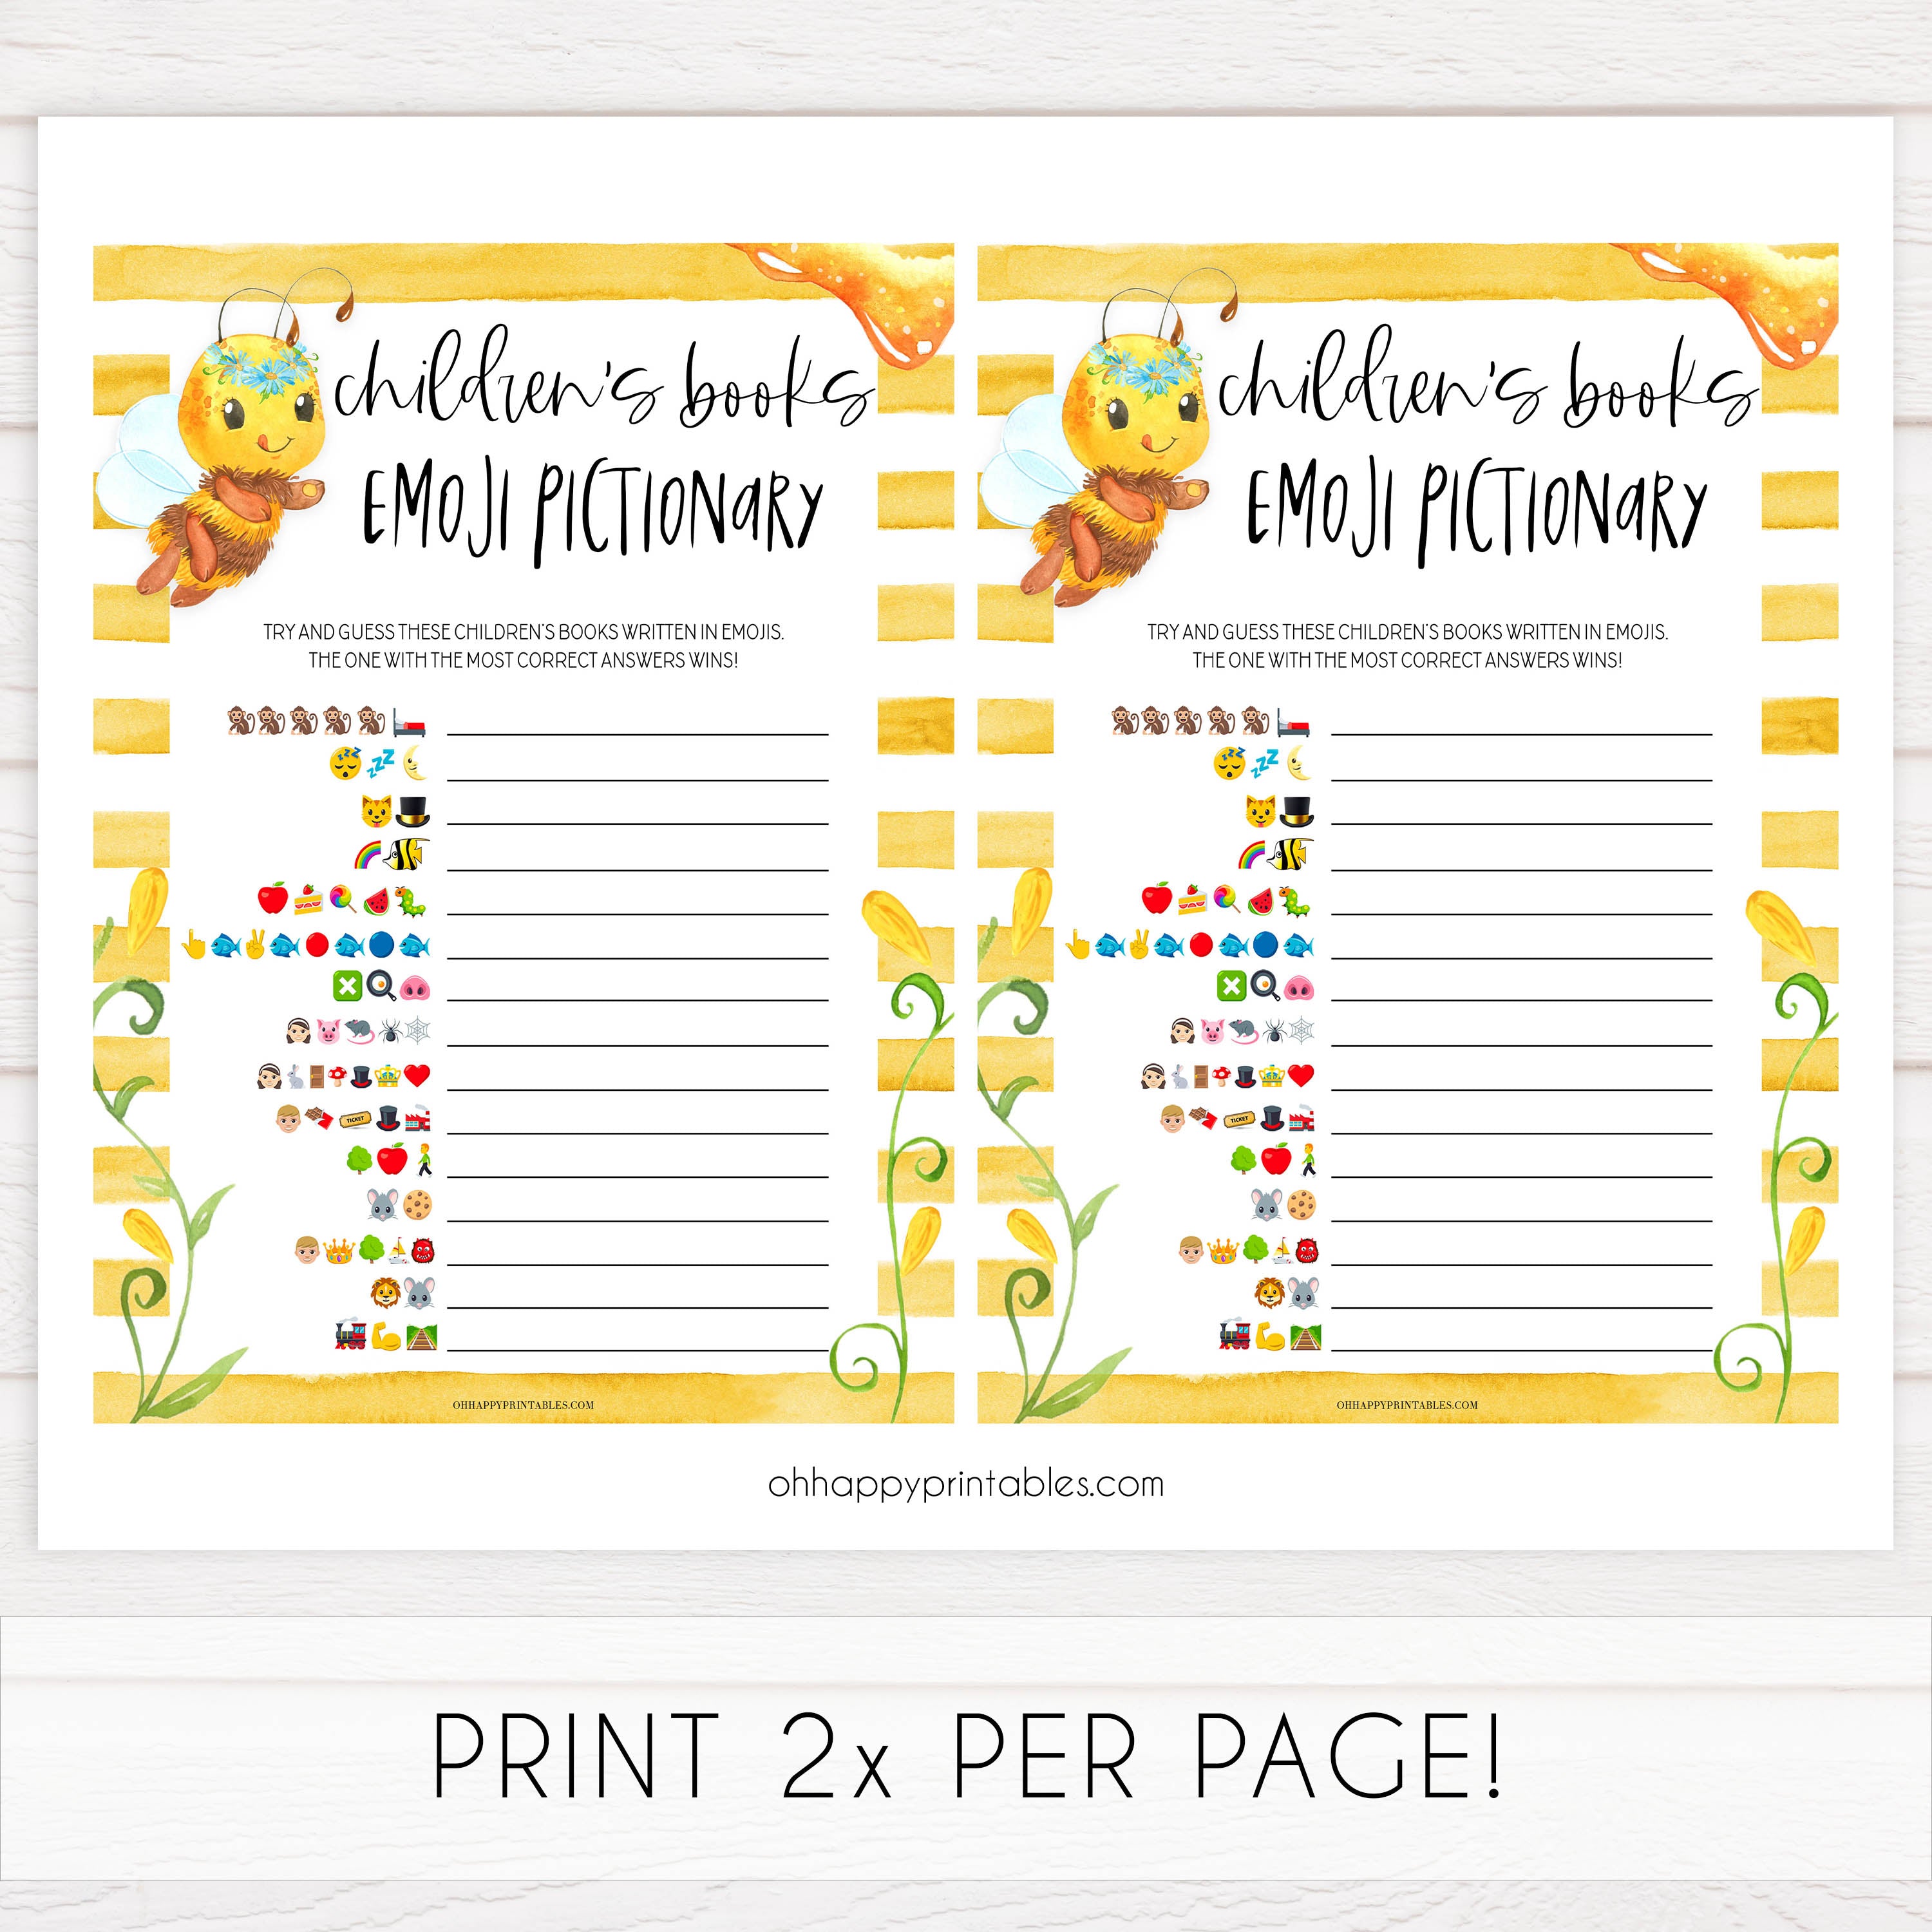 Childrens books emoji pictionary, Printable baby shower games, mommy bee fun baby games, baby shower games, fun baby shower ideas, top baby shower ideas, mommy to bee baby shower, friends baby shower ideas